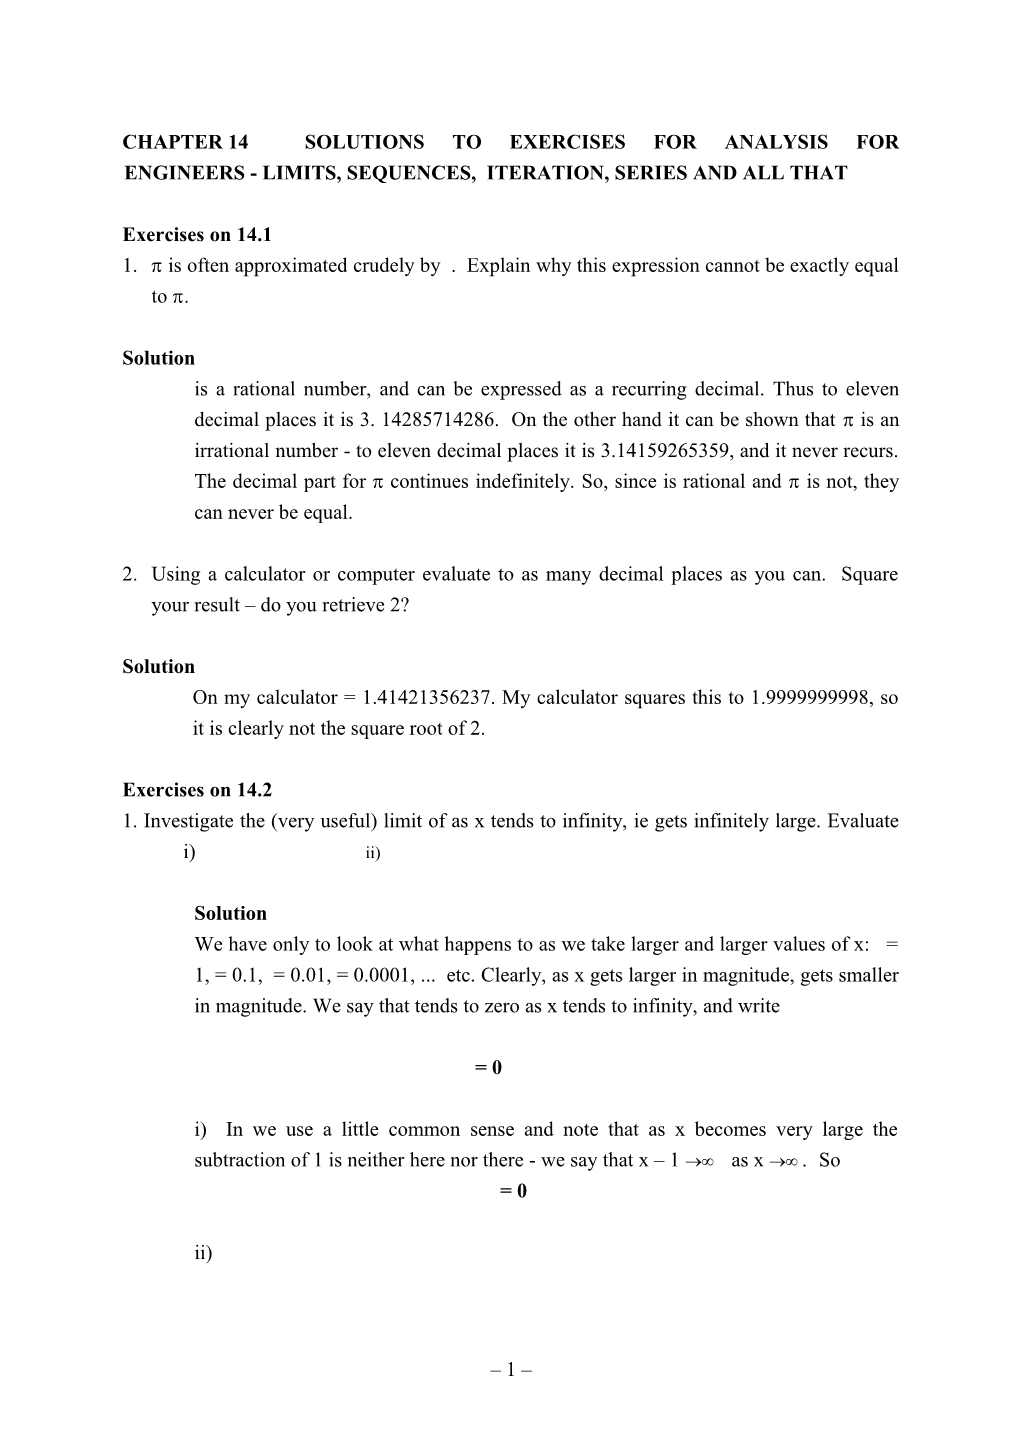 Chapter 14Solutions to Exercises for Analysis for Engineers - Limits, Sequences, Iteration